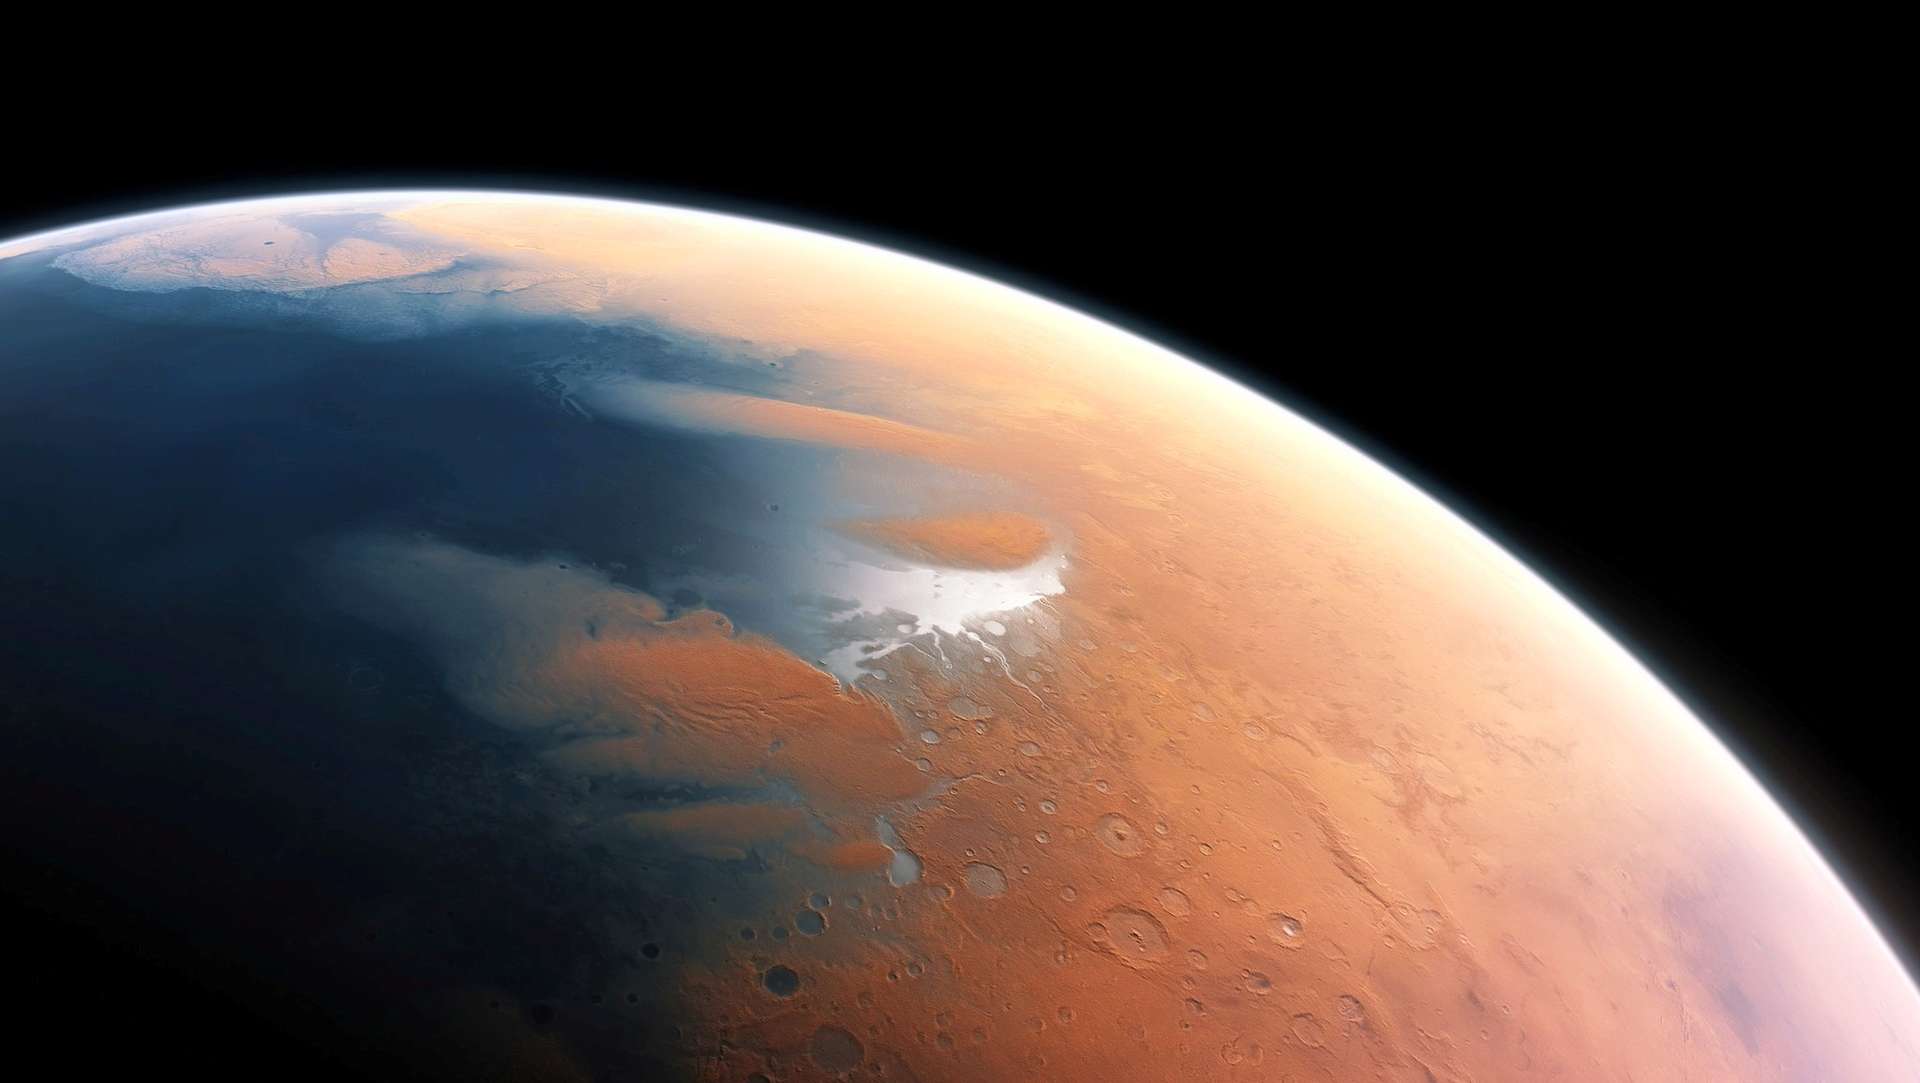 The Zhurong rover provides evidence that this region of Mars was covered by an ocean!